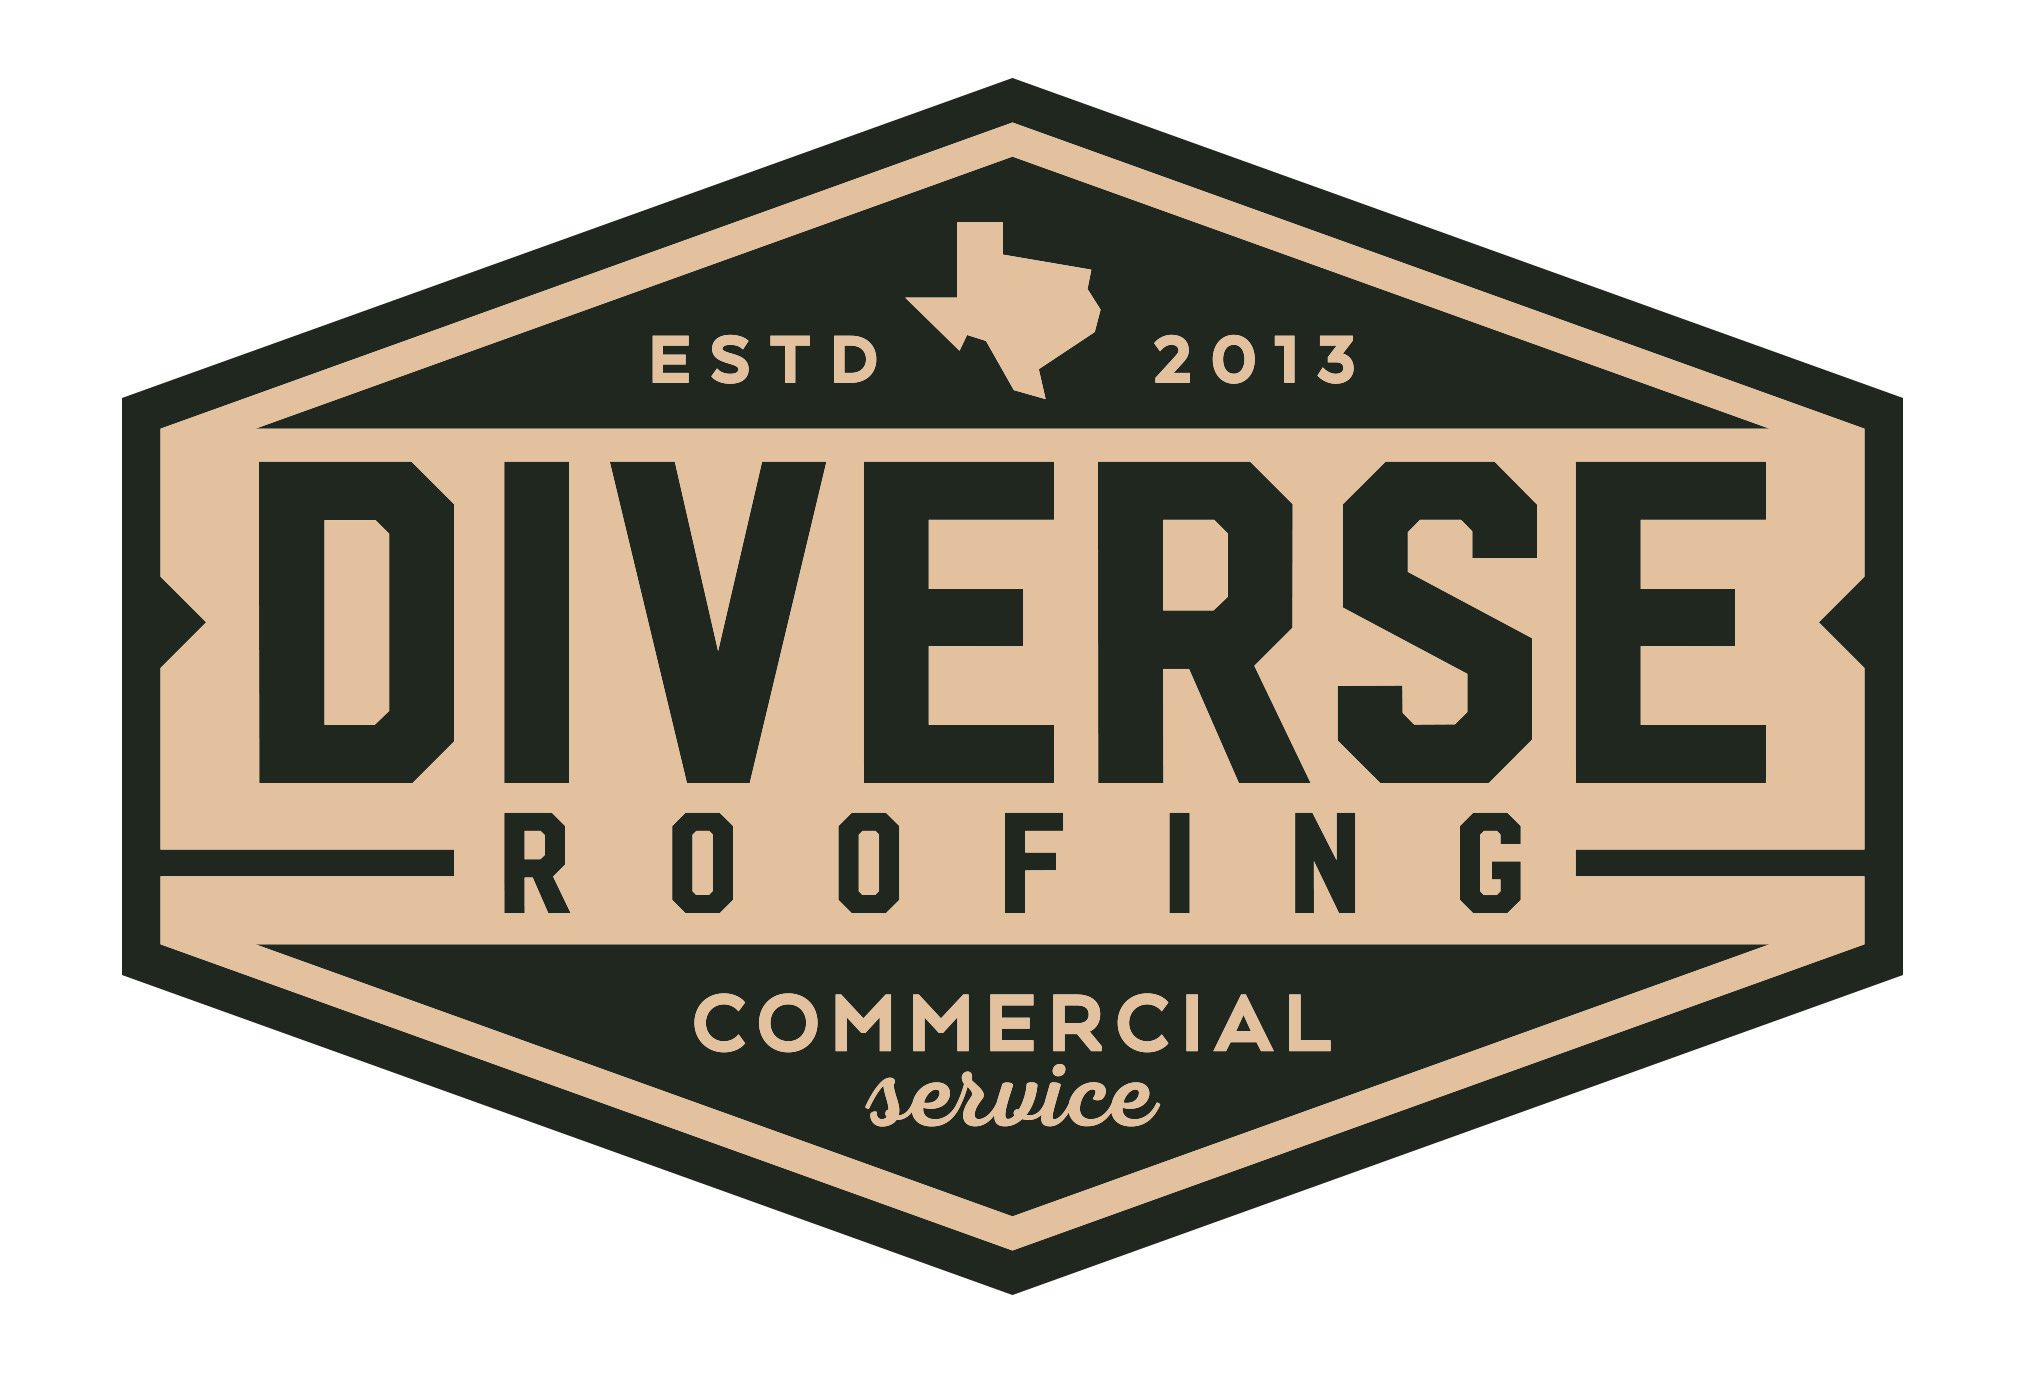 diverse roofing commercial logo design by left hand design in austin texas